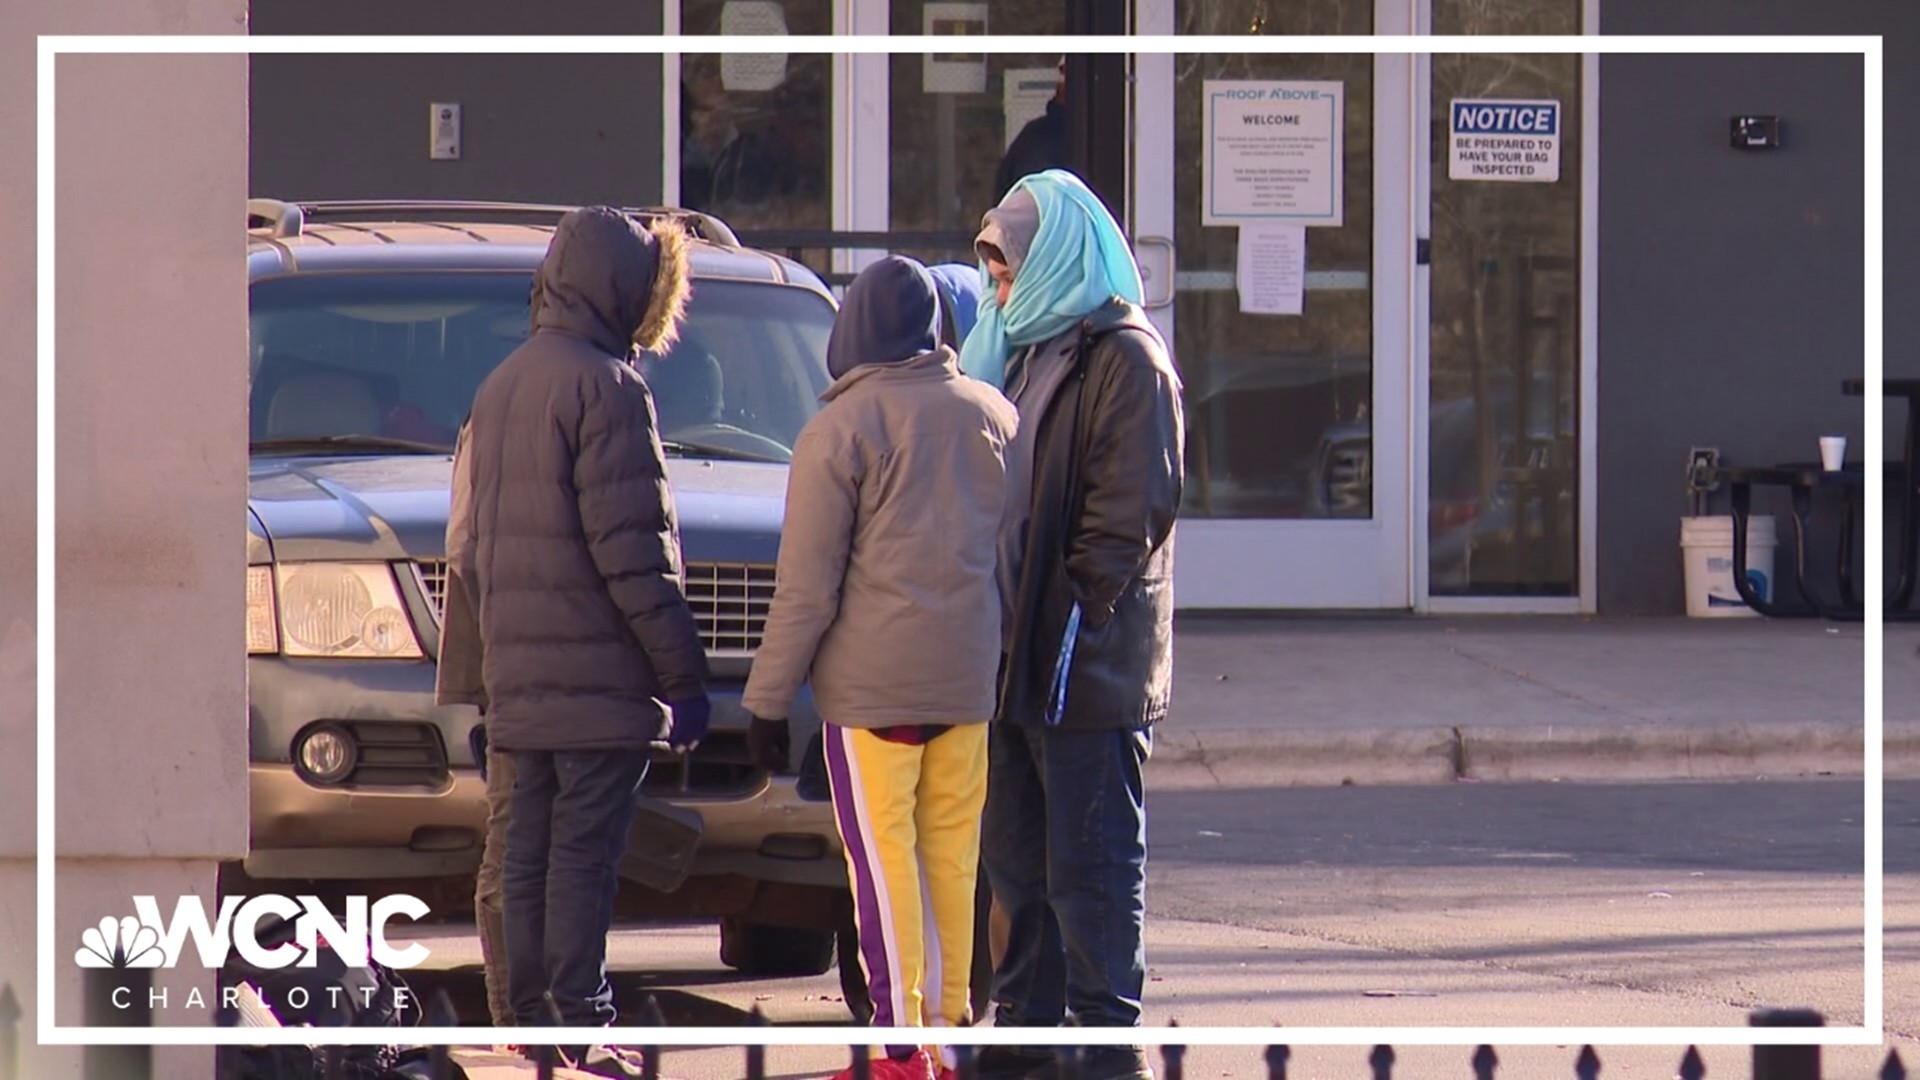 Faith, Hope and Love Ministries is looking to open its doors to the homeless to help them stay warm. But city officials say the church isn't up to code for it.